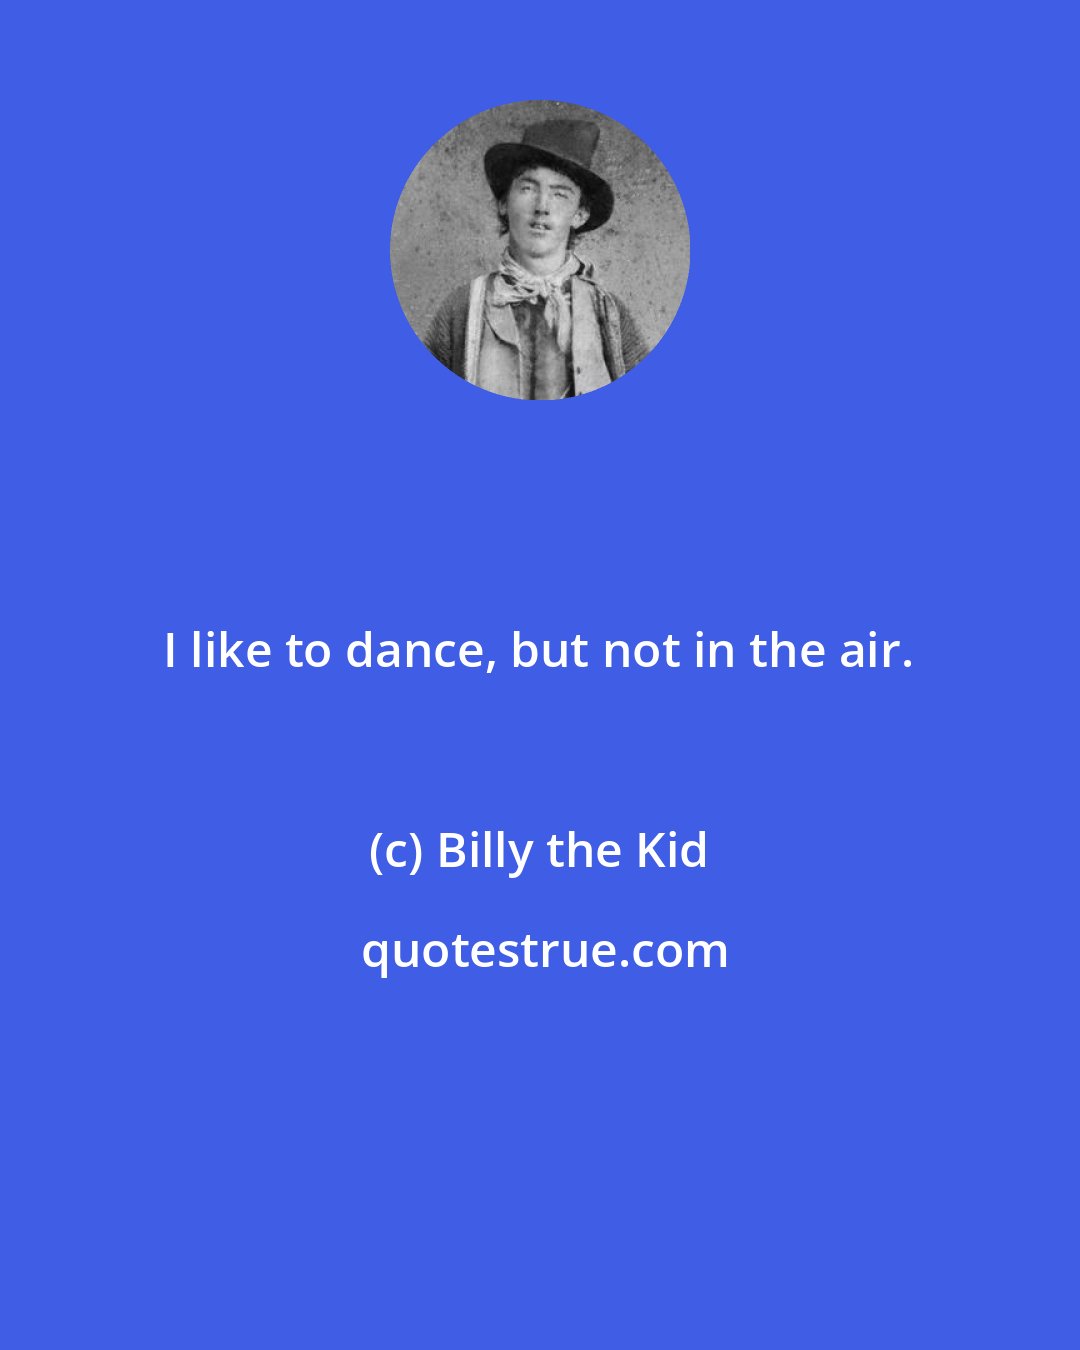 Billy the Kid: I like to dance, but not in the air.